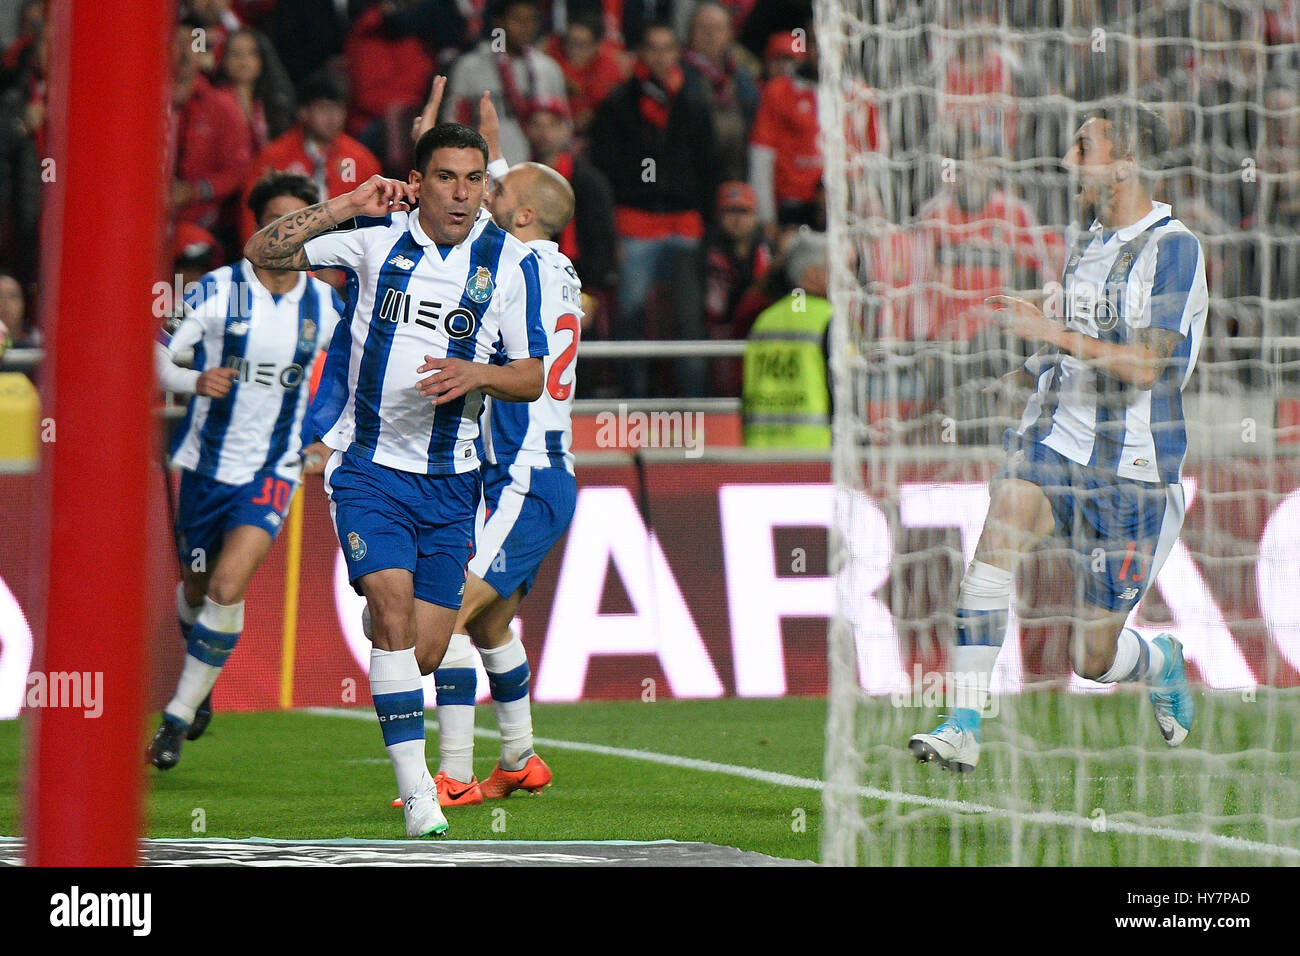 Portugal, Lisbon, April 1, 2017 -  FOOTBALL: PORTUGAL x FC PORTO - Maxi Pereira #2 PortoÕs defender from Uruguay celebrates his goal during Portuguese First League football match between SL Benfica and FC Porto in Luz Stadium on April 1, 2017 in Lisbon, Portugal. Photo: Bruno de Carvalho / Alamy Stock Photo